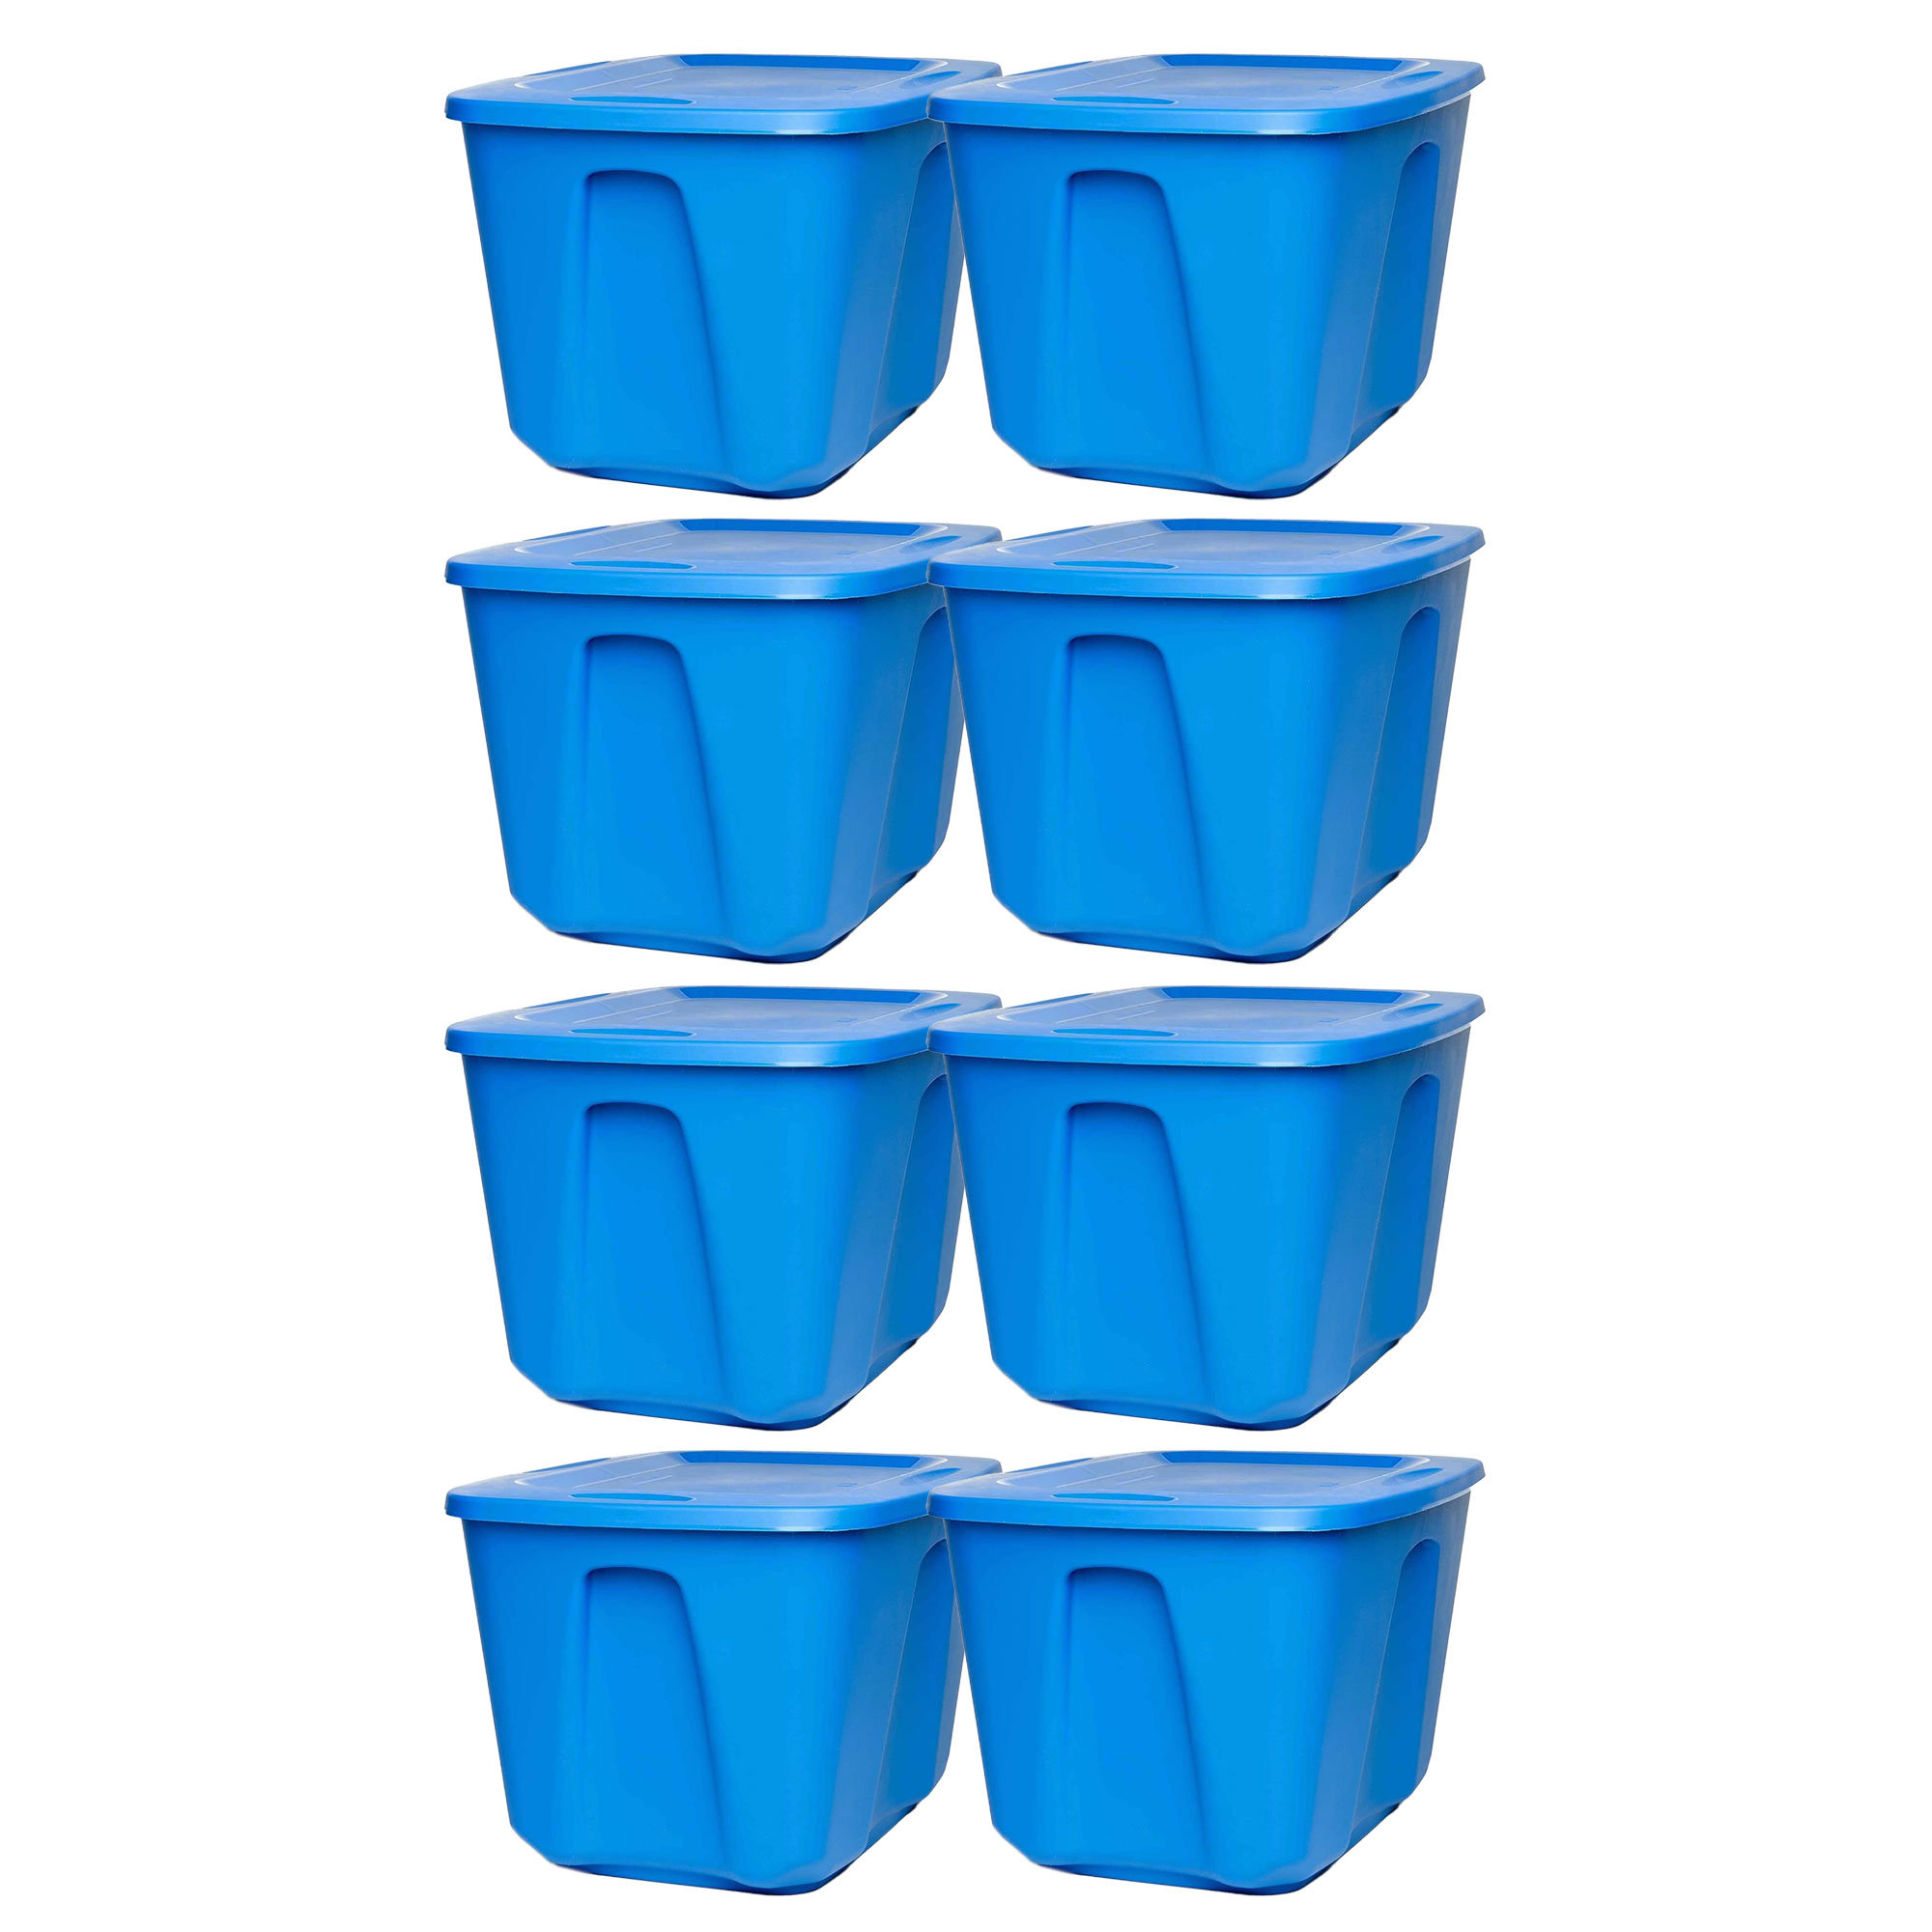 Homz 32 Gallon Standard Plastic Storage Container with Secure Lid, Blue, 2 Pack